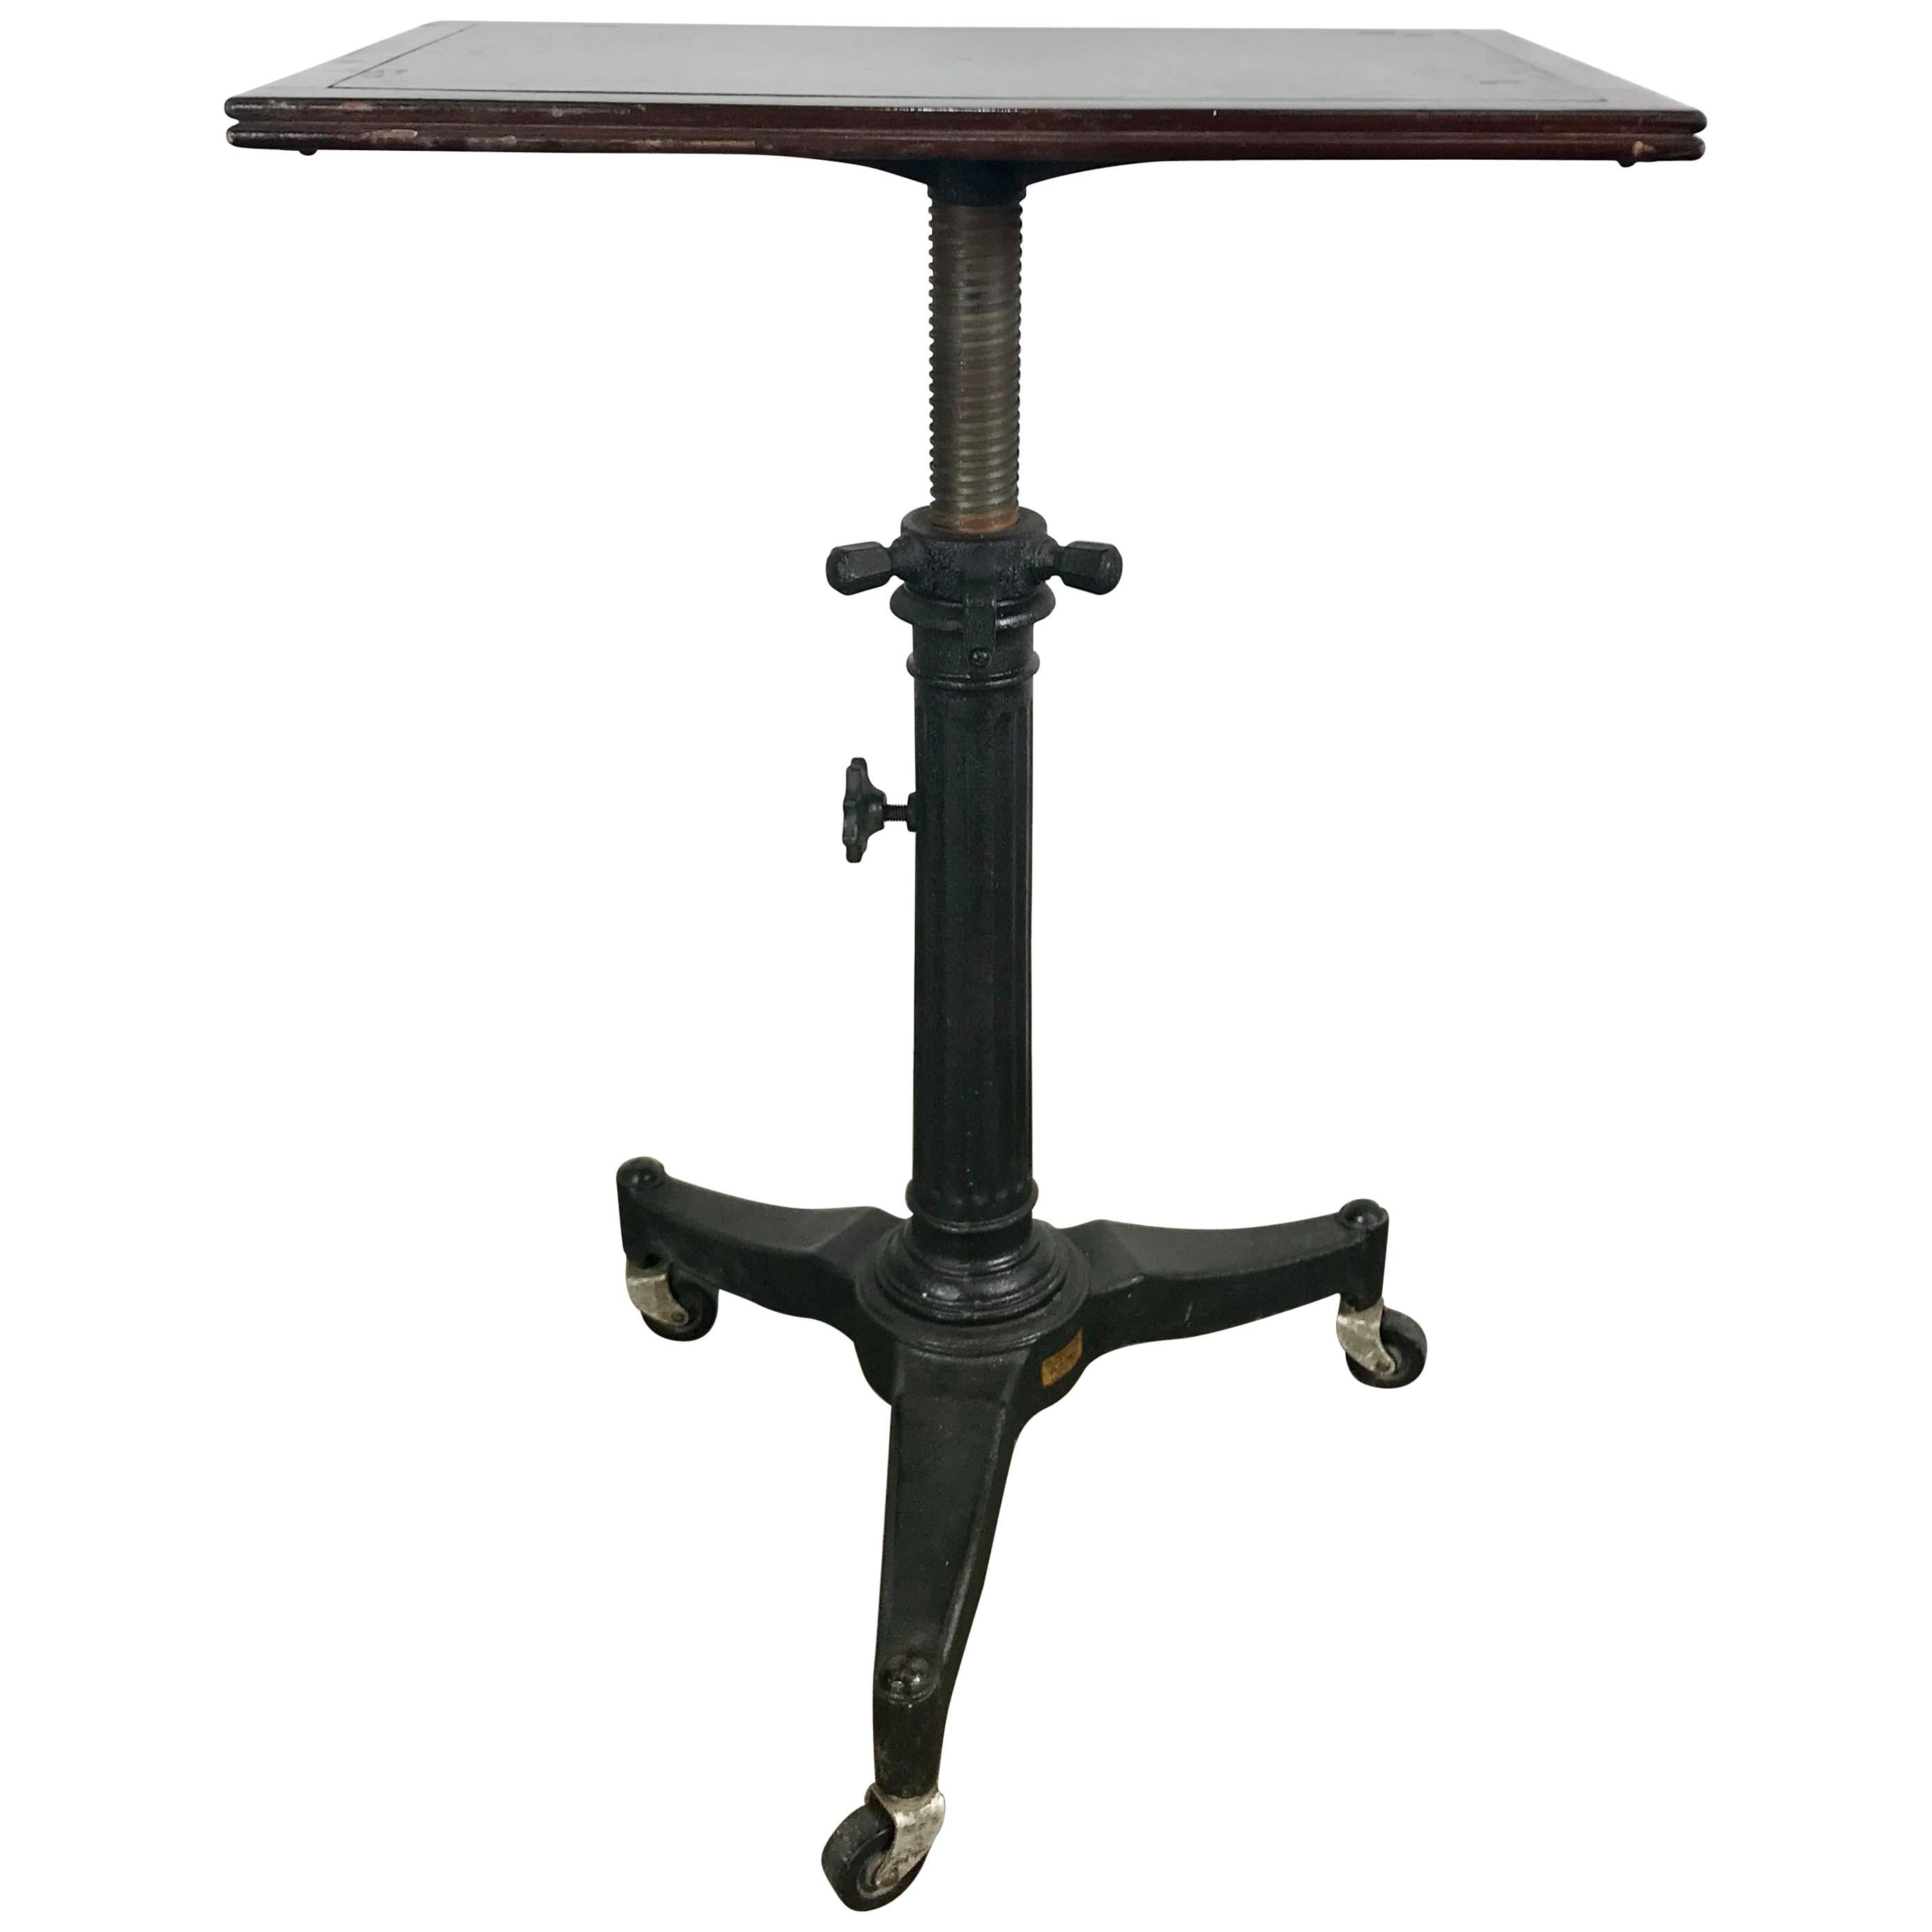 1920s Cast Iron and Wood Industrial Adjustable Table by Karl Manufacturing Co.